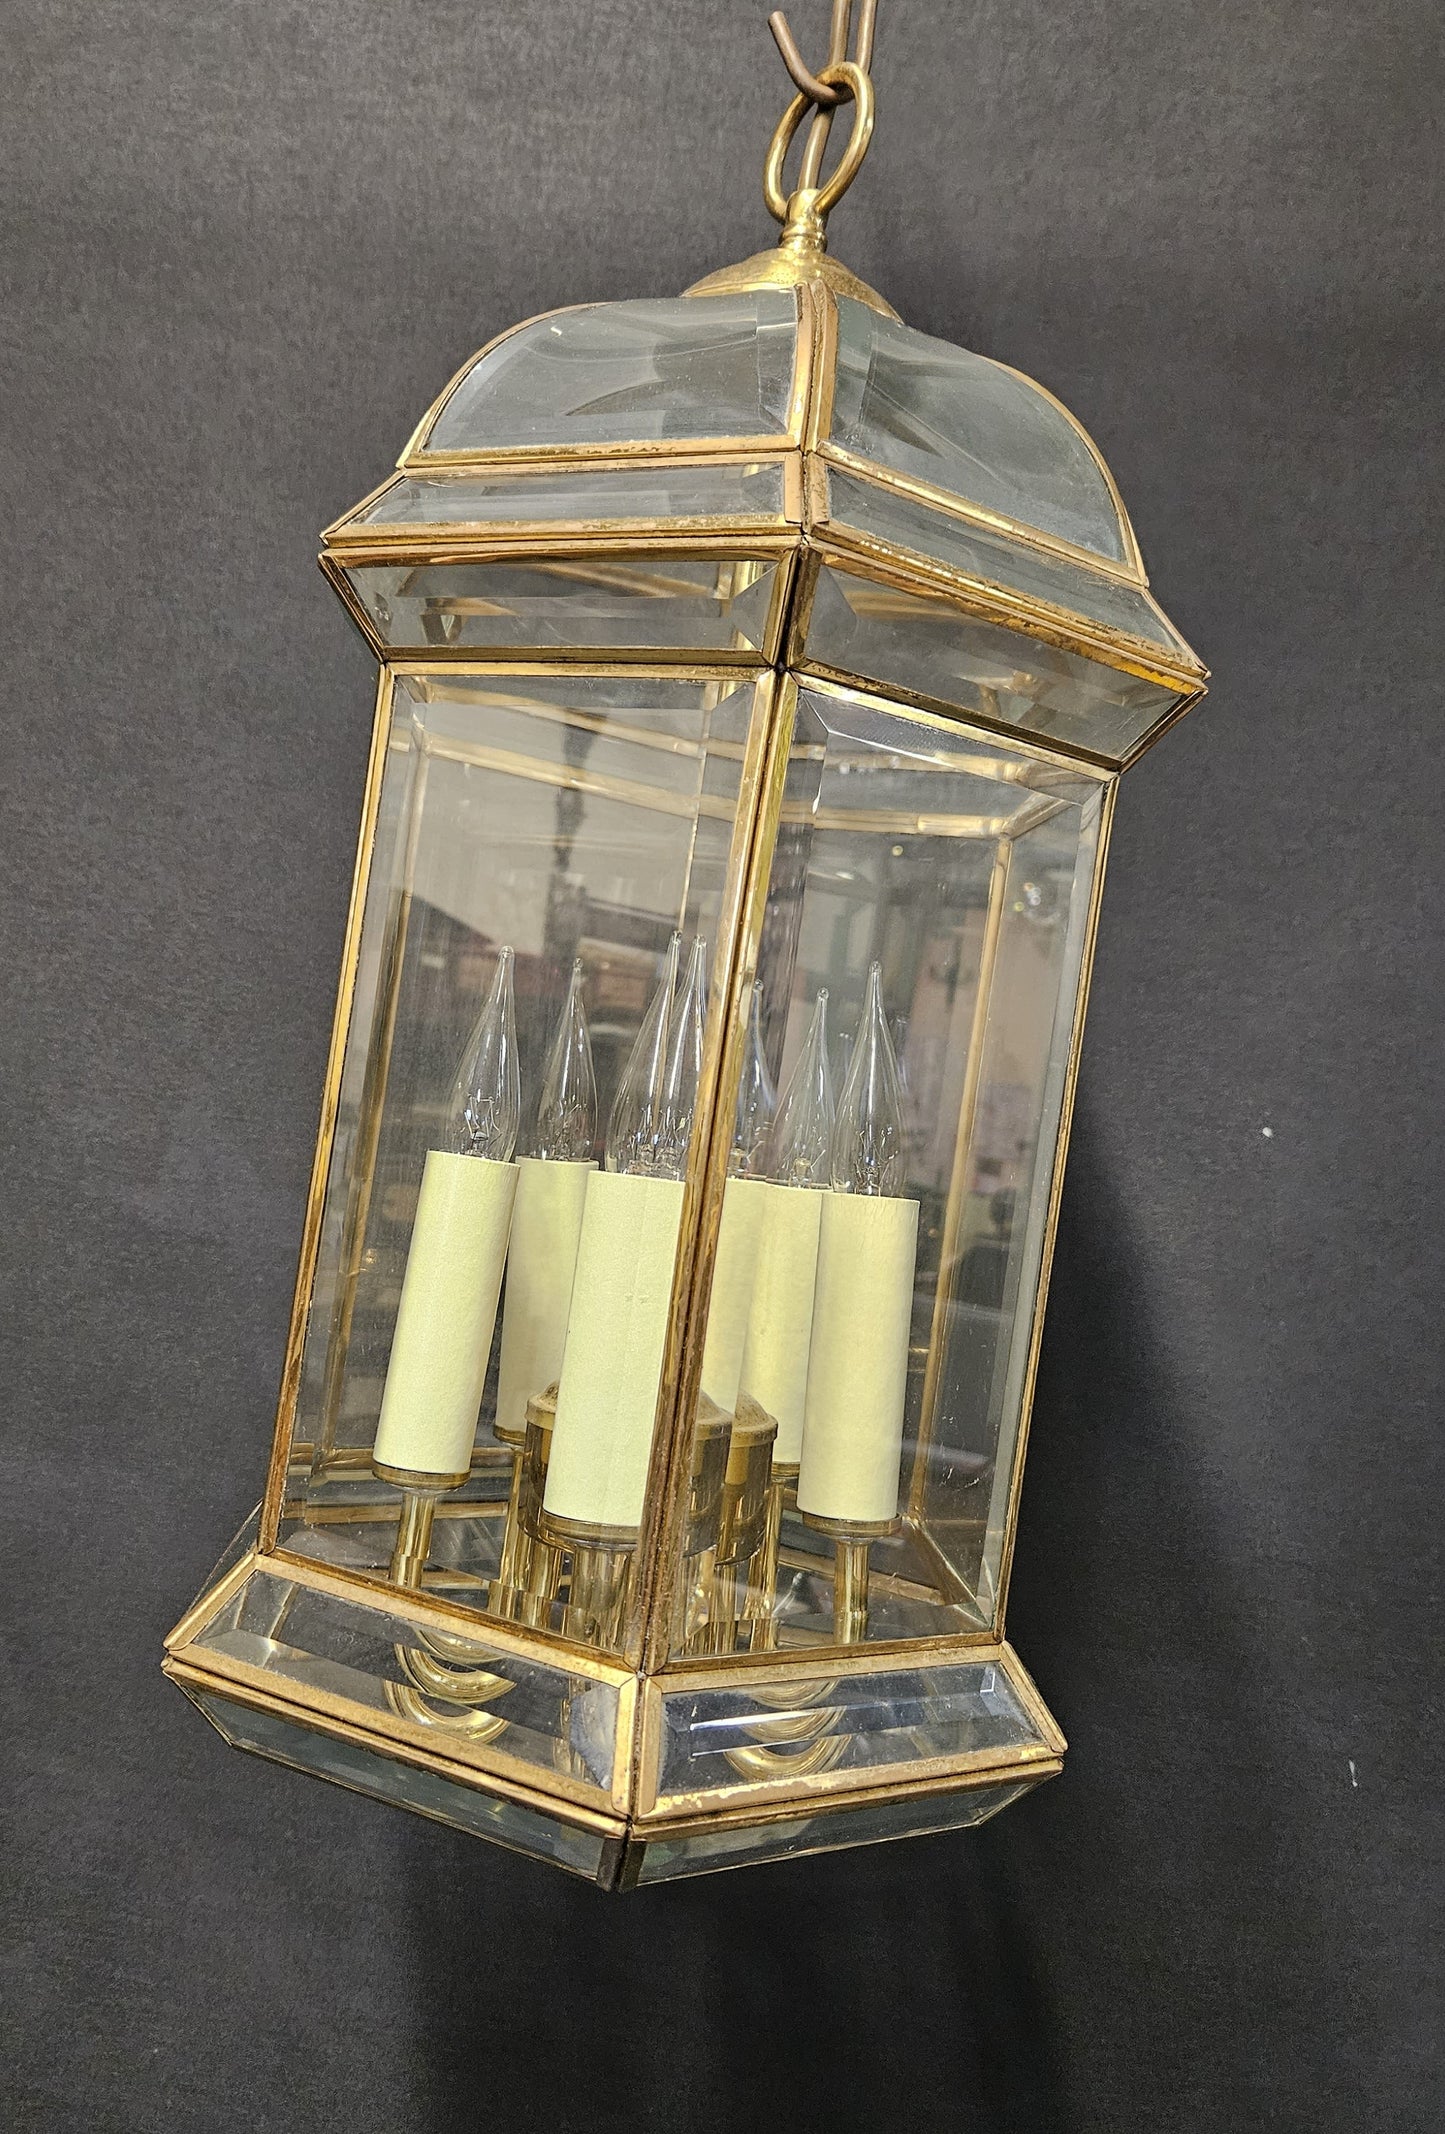 6-Sided Glass-Domed Lantern, CA. 1980